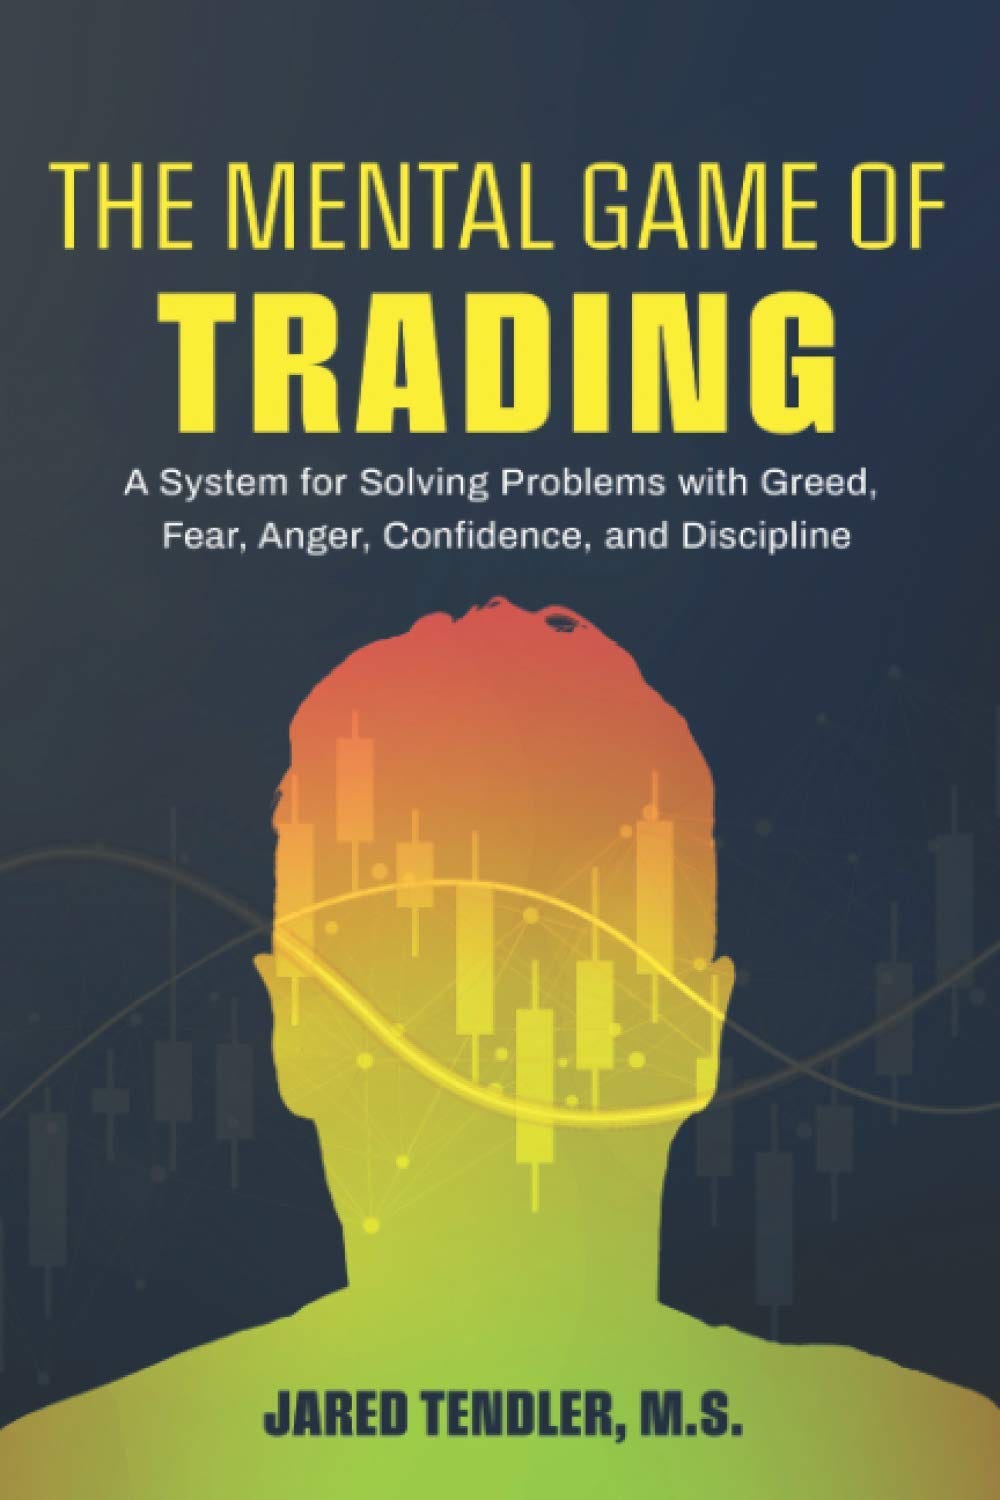 Amazon.com: The Mental Game of Trading: A System for Solving Problems with  Greed, Fear, Anger, Confidence, and Discipline: 9781734030914: Tendler,  Jared: Books